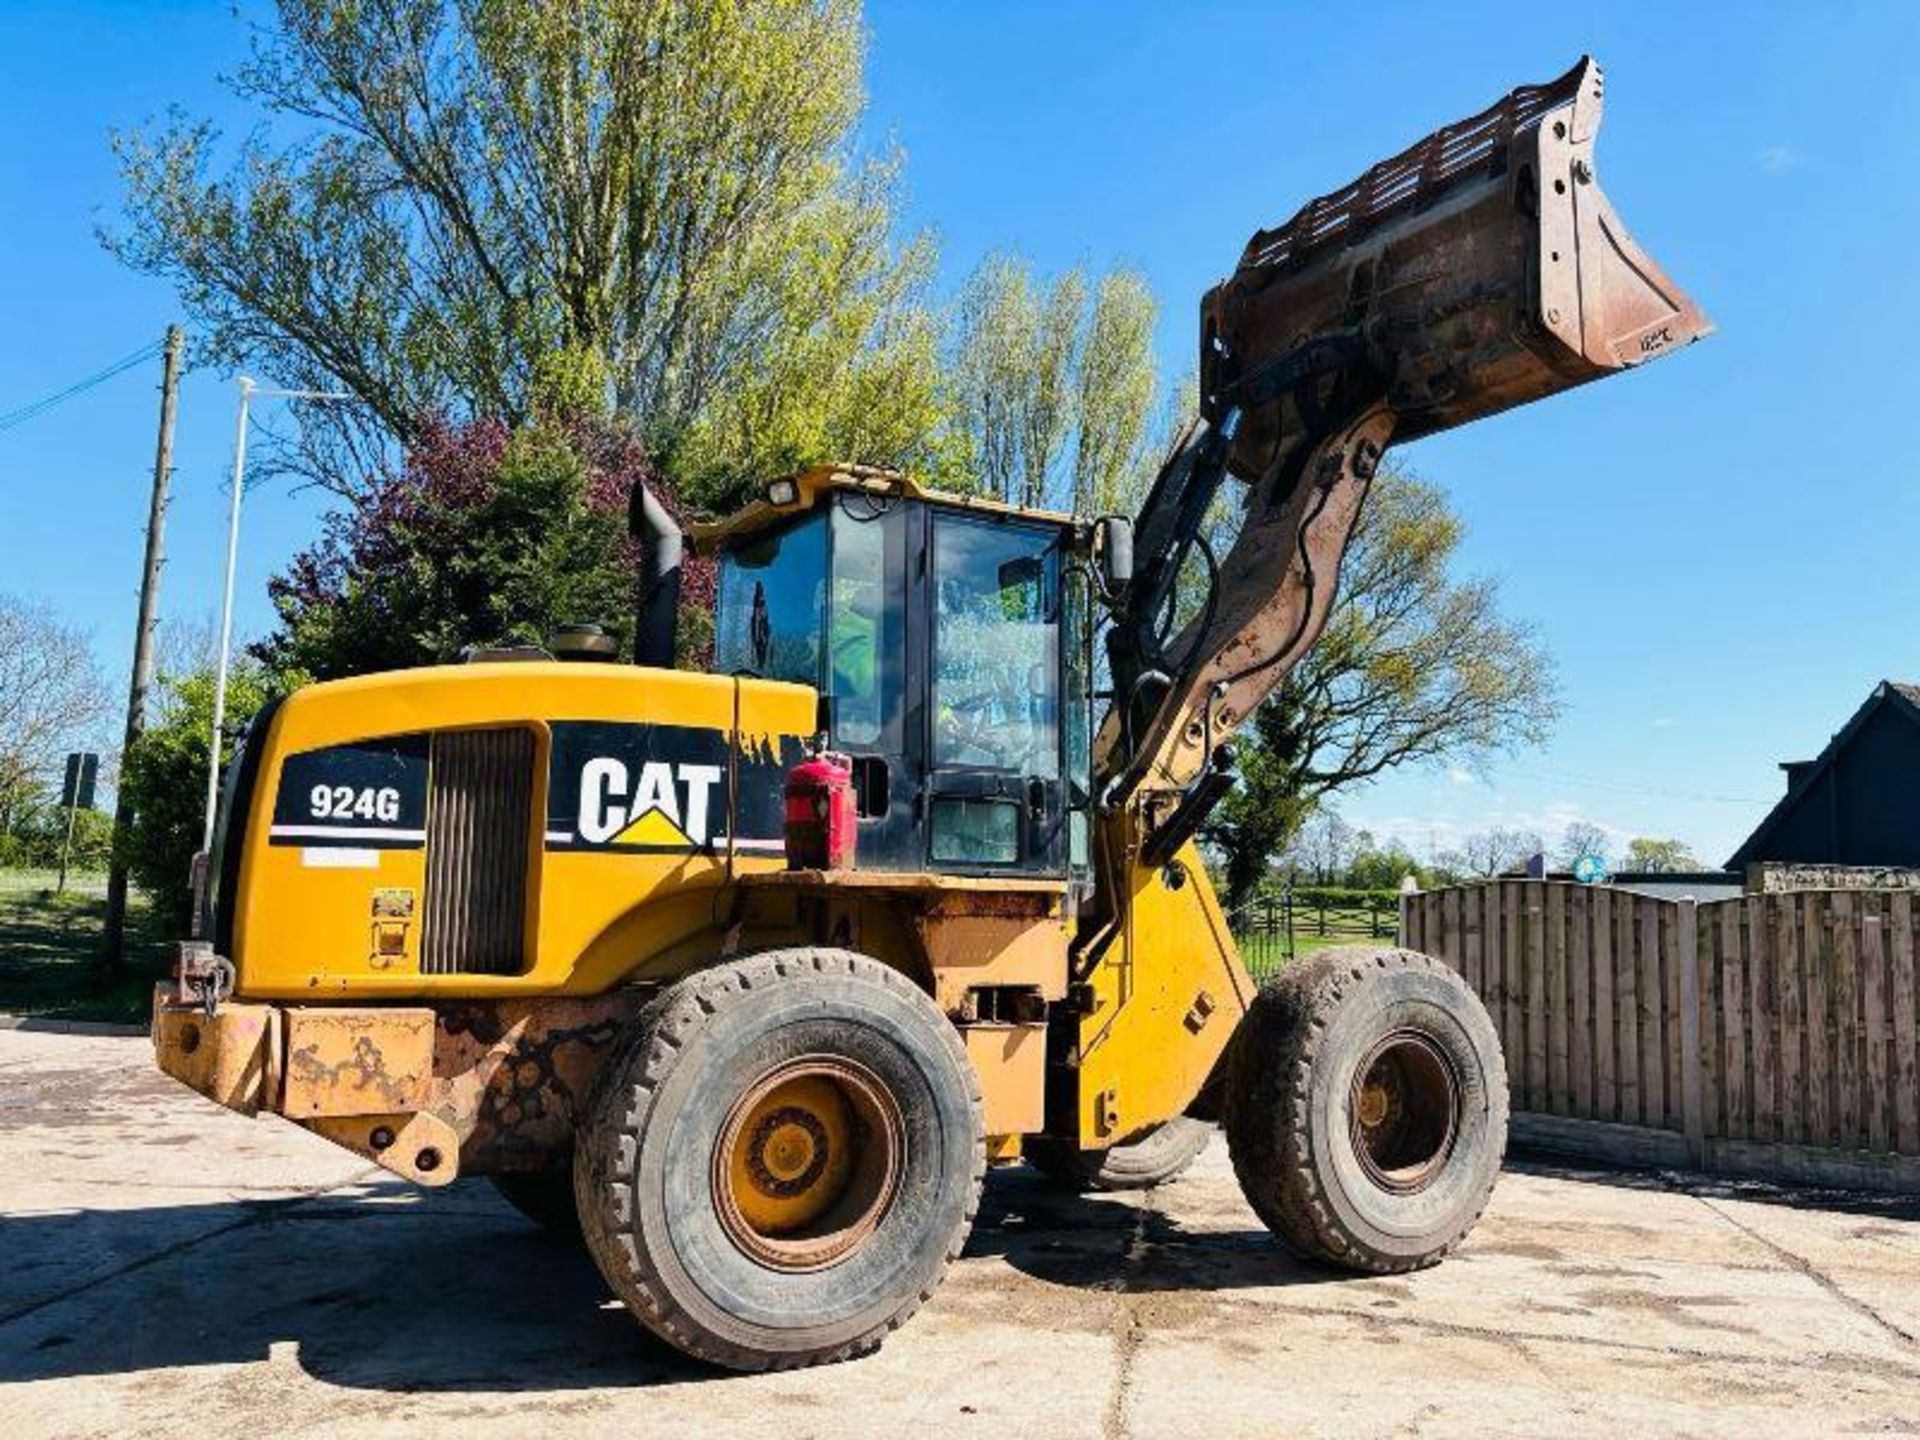 CATERPILLAR 924G 4WD LOADING SHOVEL C/W FOUR IN ONE BUCKET  - Image 15 of 18